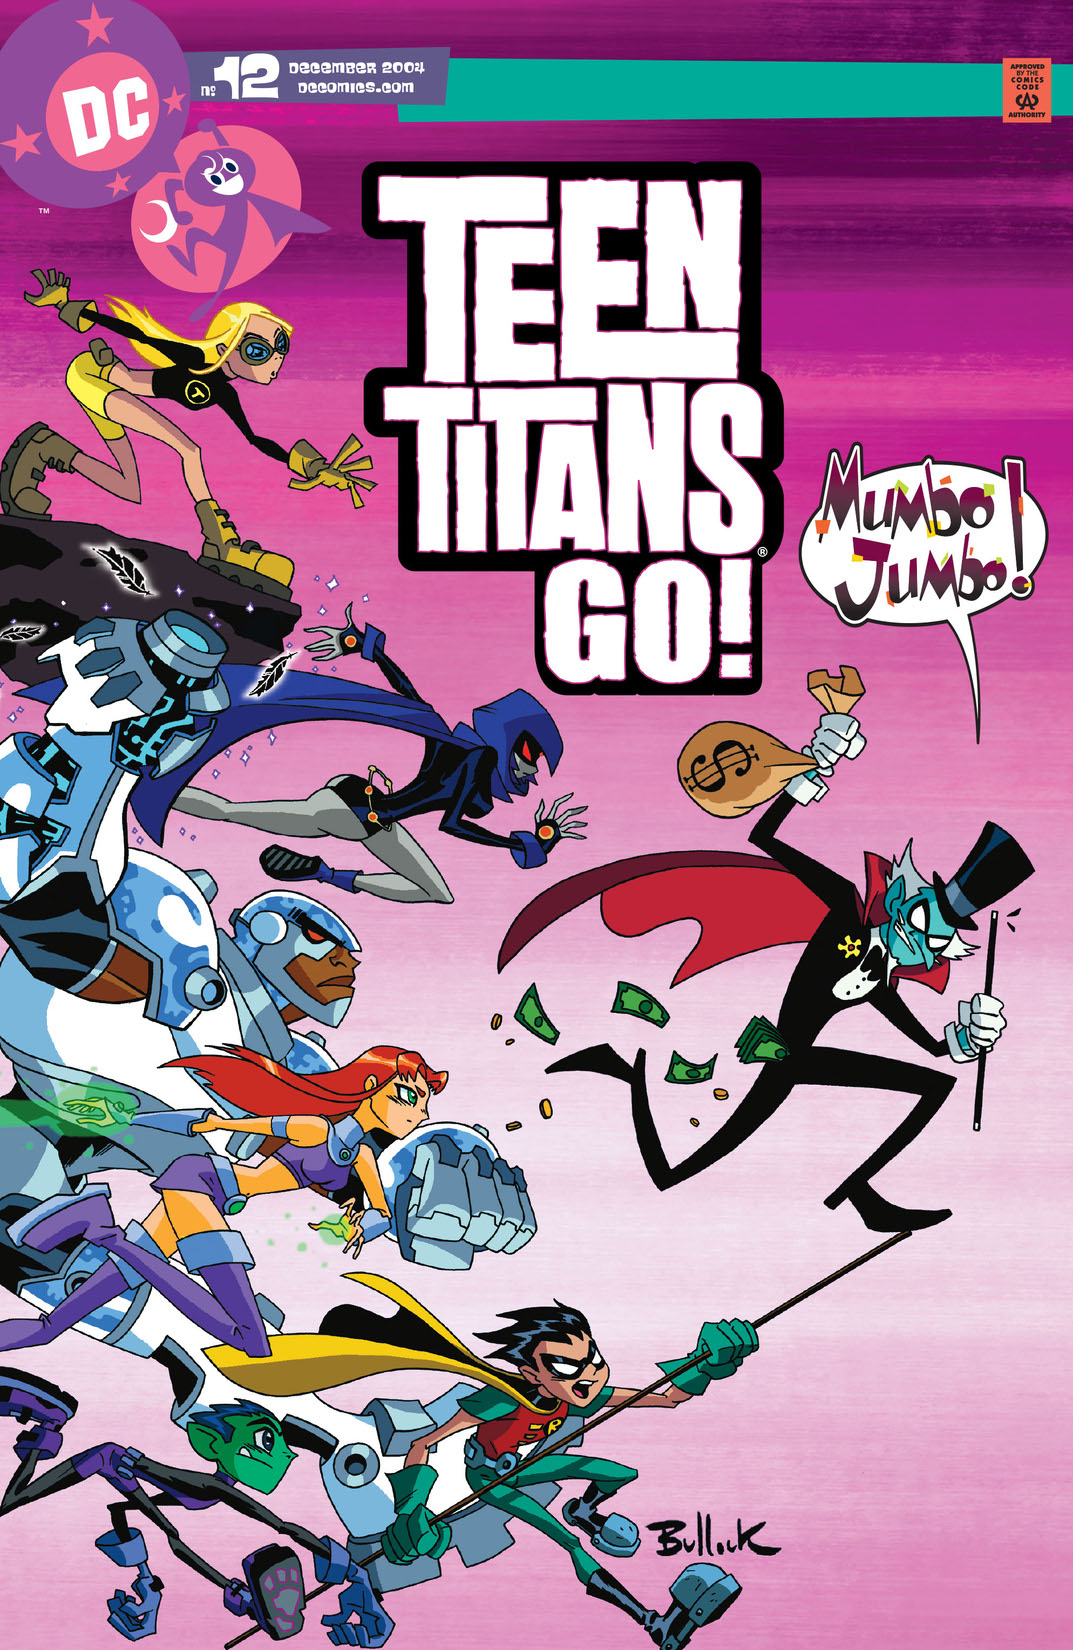 Teen Titans Go! (2003-) #12 preview images